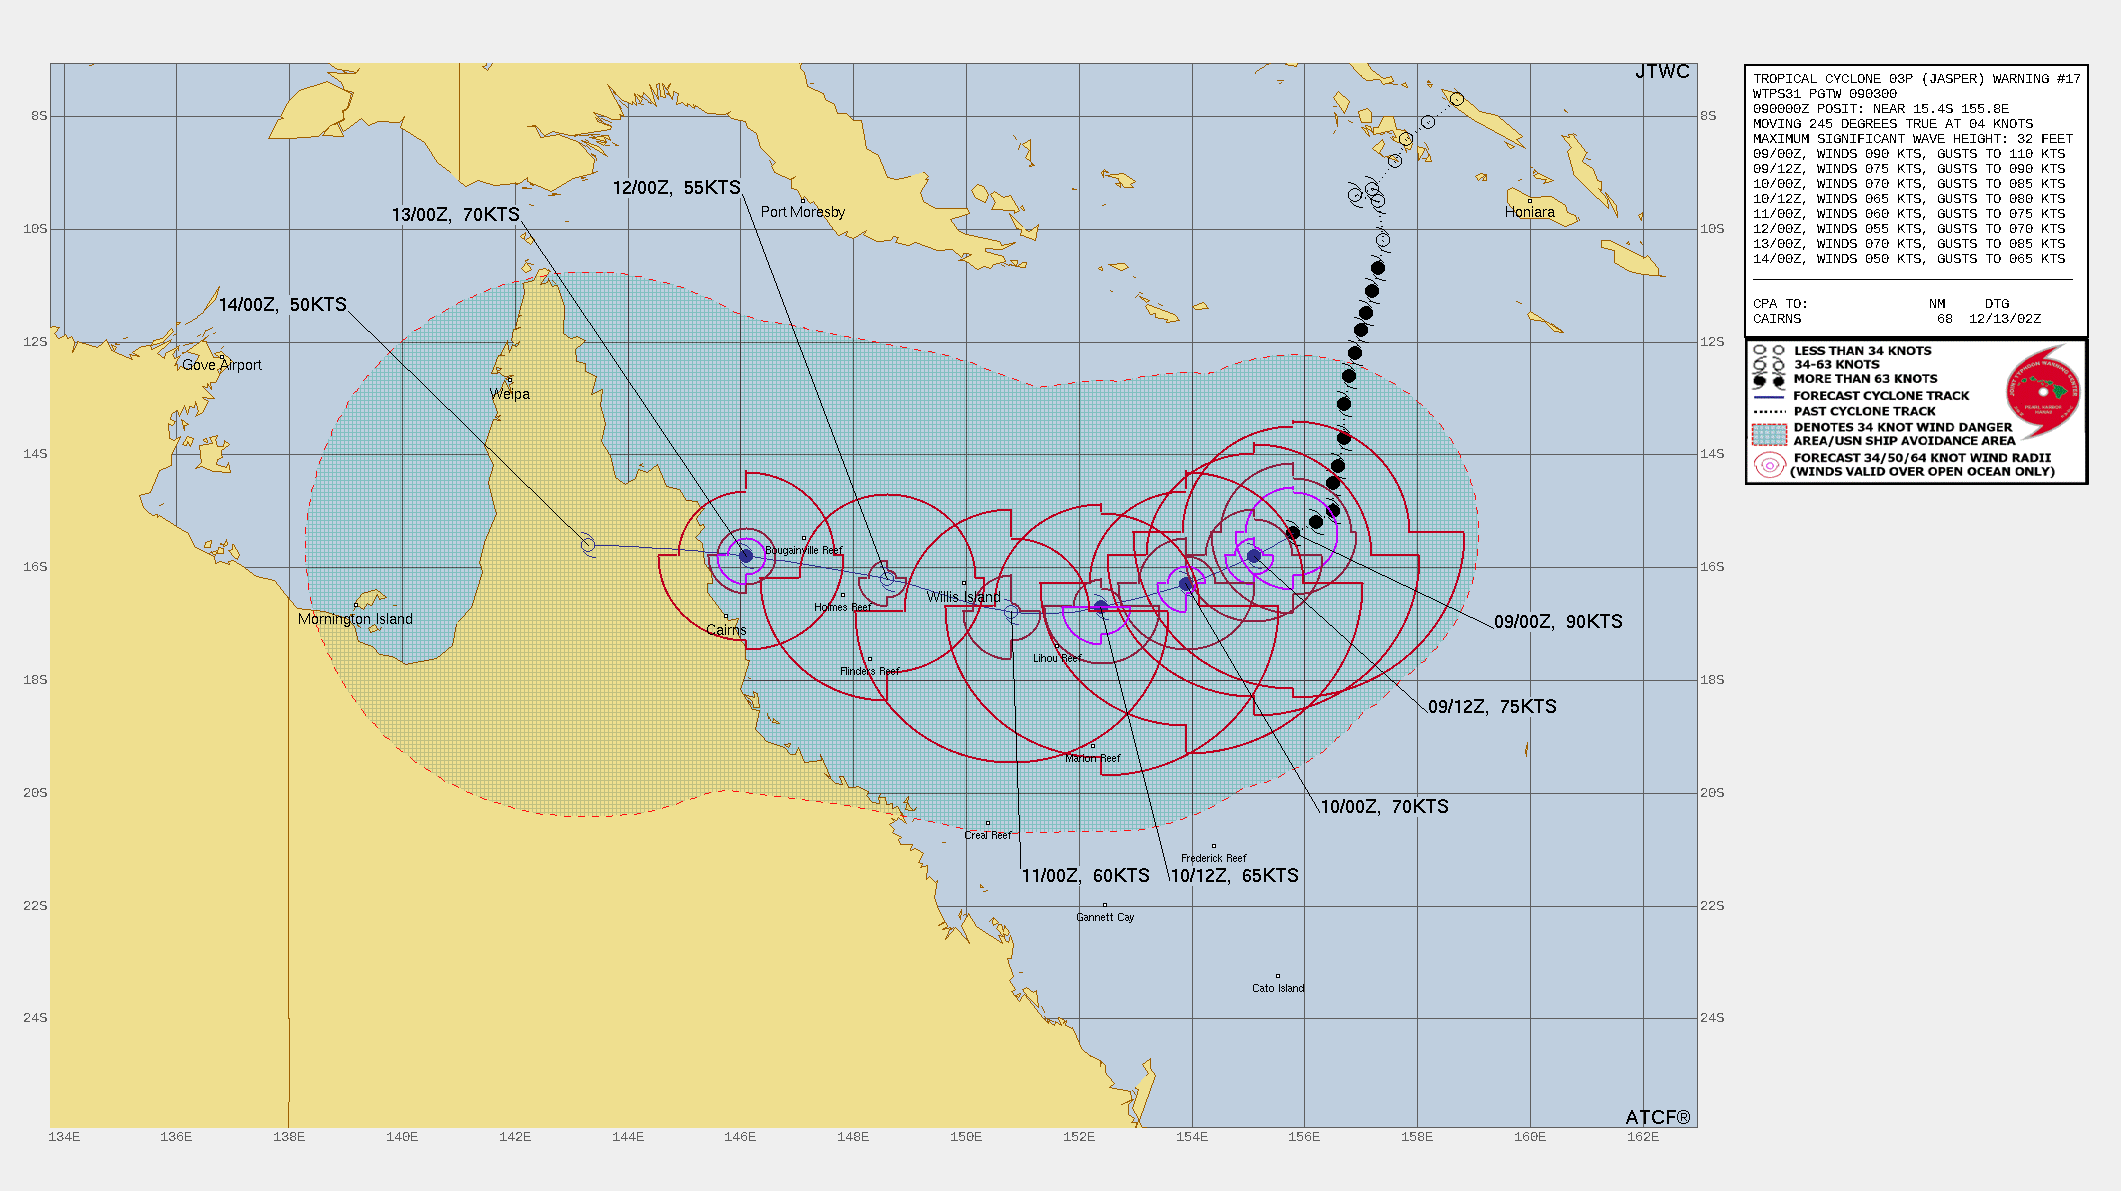 FORECAST REASONING.  SIGNIFICANT FORECAST CHANGES: THERE ARE NO SIGNIFICANT CHANGES TO THE FORECAST FROM THE PREVIOUS WARNING.  FORECAST DISCUSSION: NOW THAT THE STR TO THE SOUTH HAS ASSUMED THE DOMINANT STEERING ROLE, TC 03P IS FORECAST TO TRACE A GRACEFUL WEST-SOUTHWEST TO WEST ARC OVER THE NEXT 48 HOURS, MOVING ALONG THE NORTHERN SIDE OF THE STR TO THE SOUTH. THE SYSTEM IS EXPECTED TO PASS THE OUTERMOST LINE OF REEF STATIONS, PASSING BETWEEN WILLIS ISLAND AND LIHOU REEF AROUND TAU 48. THE RIDGE IS EXPECTED TO PUSH NORTHWARD SHORTLY AFTER TAU 48, WHICH WILL PUSH TC 03P ONTO A MORE WEST-NORTHWEST TRACK THROUGH TAU 72, BEFORE FLATTENING OUT ONCE MORE BY THE END OF THE FORECAST. LANDFALL IS EXPECTED ALONG THE EASTERN COAST OF AUSTRALIA, NORTH OF CAIRNS, JUST AFTER TAU 96. THE SYSTEM IS CLEARLY WEAKENING FAIRLY QUICKLY, AND THE PACE OF WEAKENING IS ANTICIPATED TO ACCELERATE OVER THE NEXT 24 HOURS AS THE HIGH SHEAR VALUES PERSIST AND DRY AIR CONTINUES TO ENGULF AND SMOTHER THE SYSTEM. THE SYSTEM IS FORECAST TO BOTTOM OUT AT 55 KNOTS AT TAU 72, THOUGH A SLIGHTLY LOWER INTENSITY AT THE BOTTOM IS POSSIBLE. GLOBAL MODEL FIELDS SHOW A SHARP DECREASE IN SHEAR JUST AFTER TAU 72, ACCOMPANIED BY A DRAMATIC INCREASE IN DEEP-LAYER MOISTURE, WHICH WILL ALLOW TC 03P TO REINTENSIFY AS IT MOVES OVER THE WARM, SHALLOW WATERS OF THE GREAT BARRIER REEF. THE CURRENT FORECAST CALLS FOR A PEAK OF 70 KNOTS AT TAU 96, BUT IT IS POSSIBLE THAT A SLIGHTLY HIGHER PEAK COULD OCCUR IMMEDIATELY PRIOR TO OR COINCIDENT WITH LANDFALL. ONCE ASHORE, THE SYSTEM WILL RAPIDLY WEAKEN DUE TO FRICTIONAL EFFECTS OVER LAND.